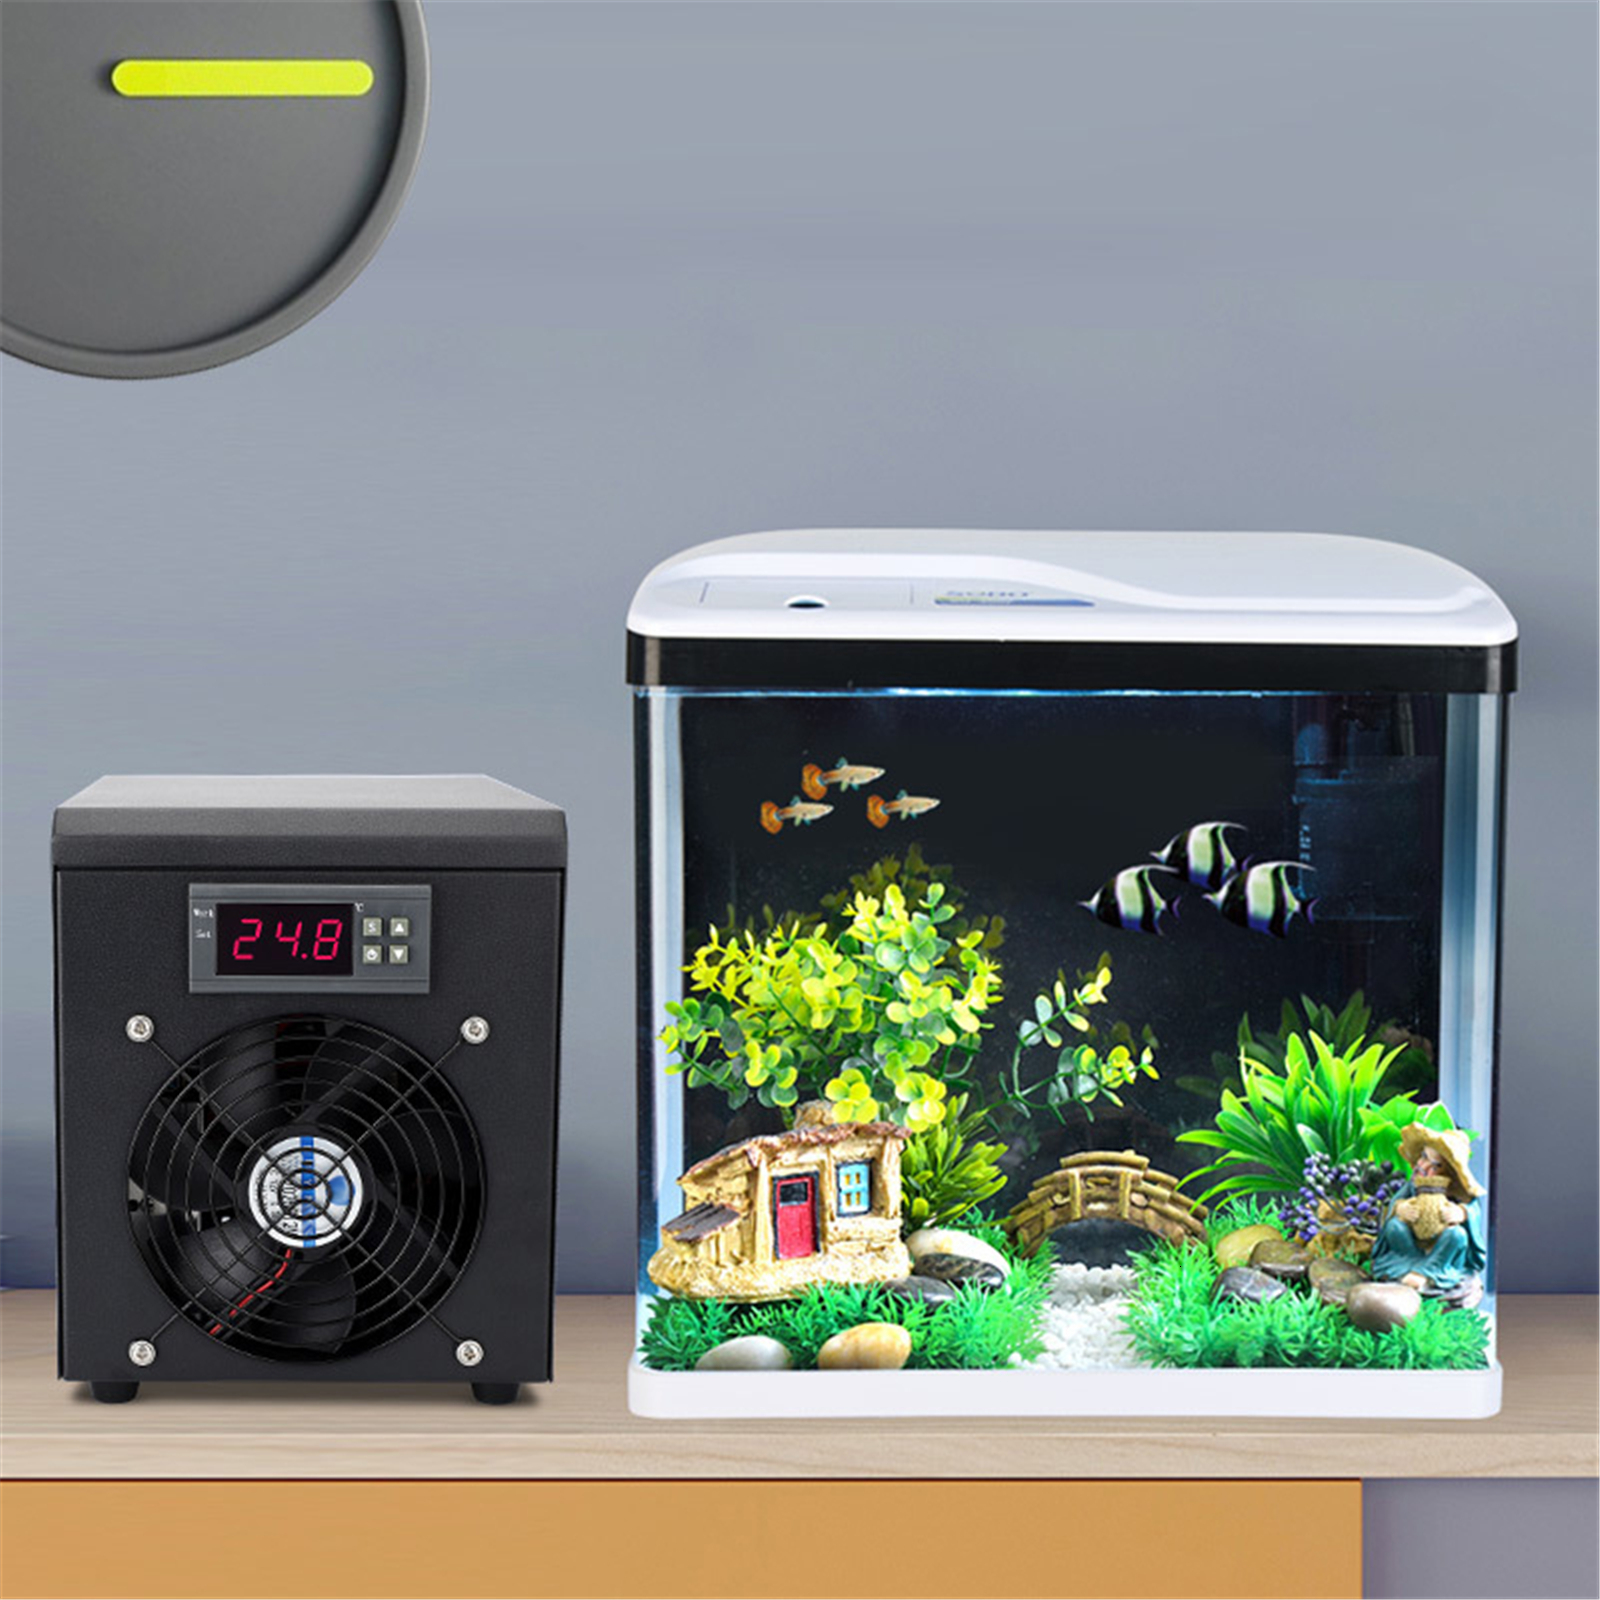 

Filtration Heating Aquarium Water Chiller 60L Fish Tank Cooler Heater System Temperature Setting Device Constant For Home Fish Shrimp Breeding Tool 221119